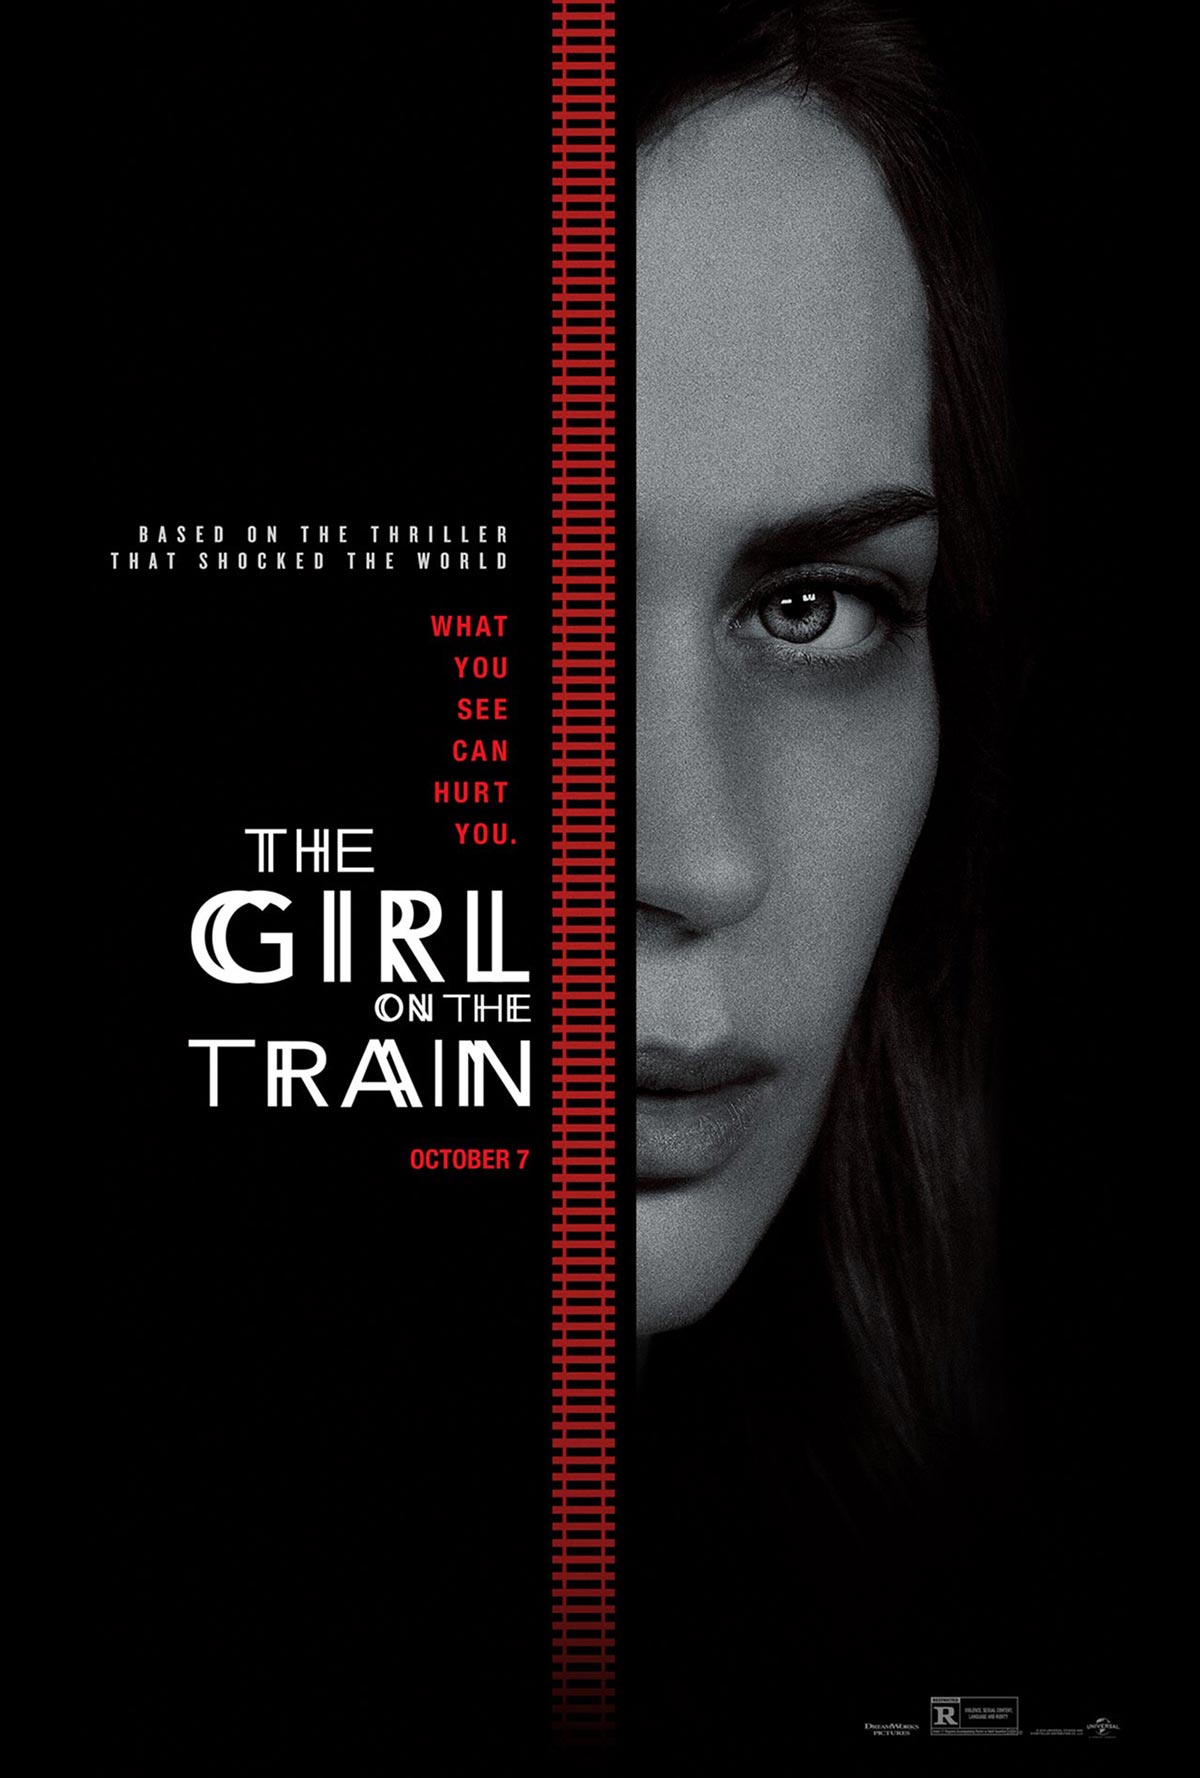 019_dreamogram-iconisus-key-art-movie-poster-the-girl-on-the-train_vertical-cover